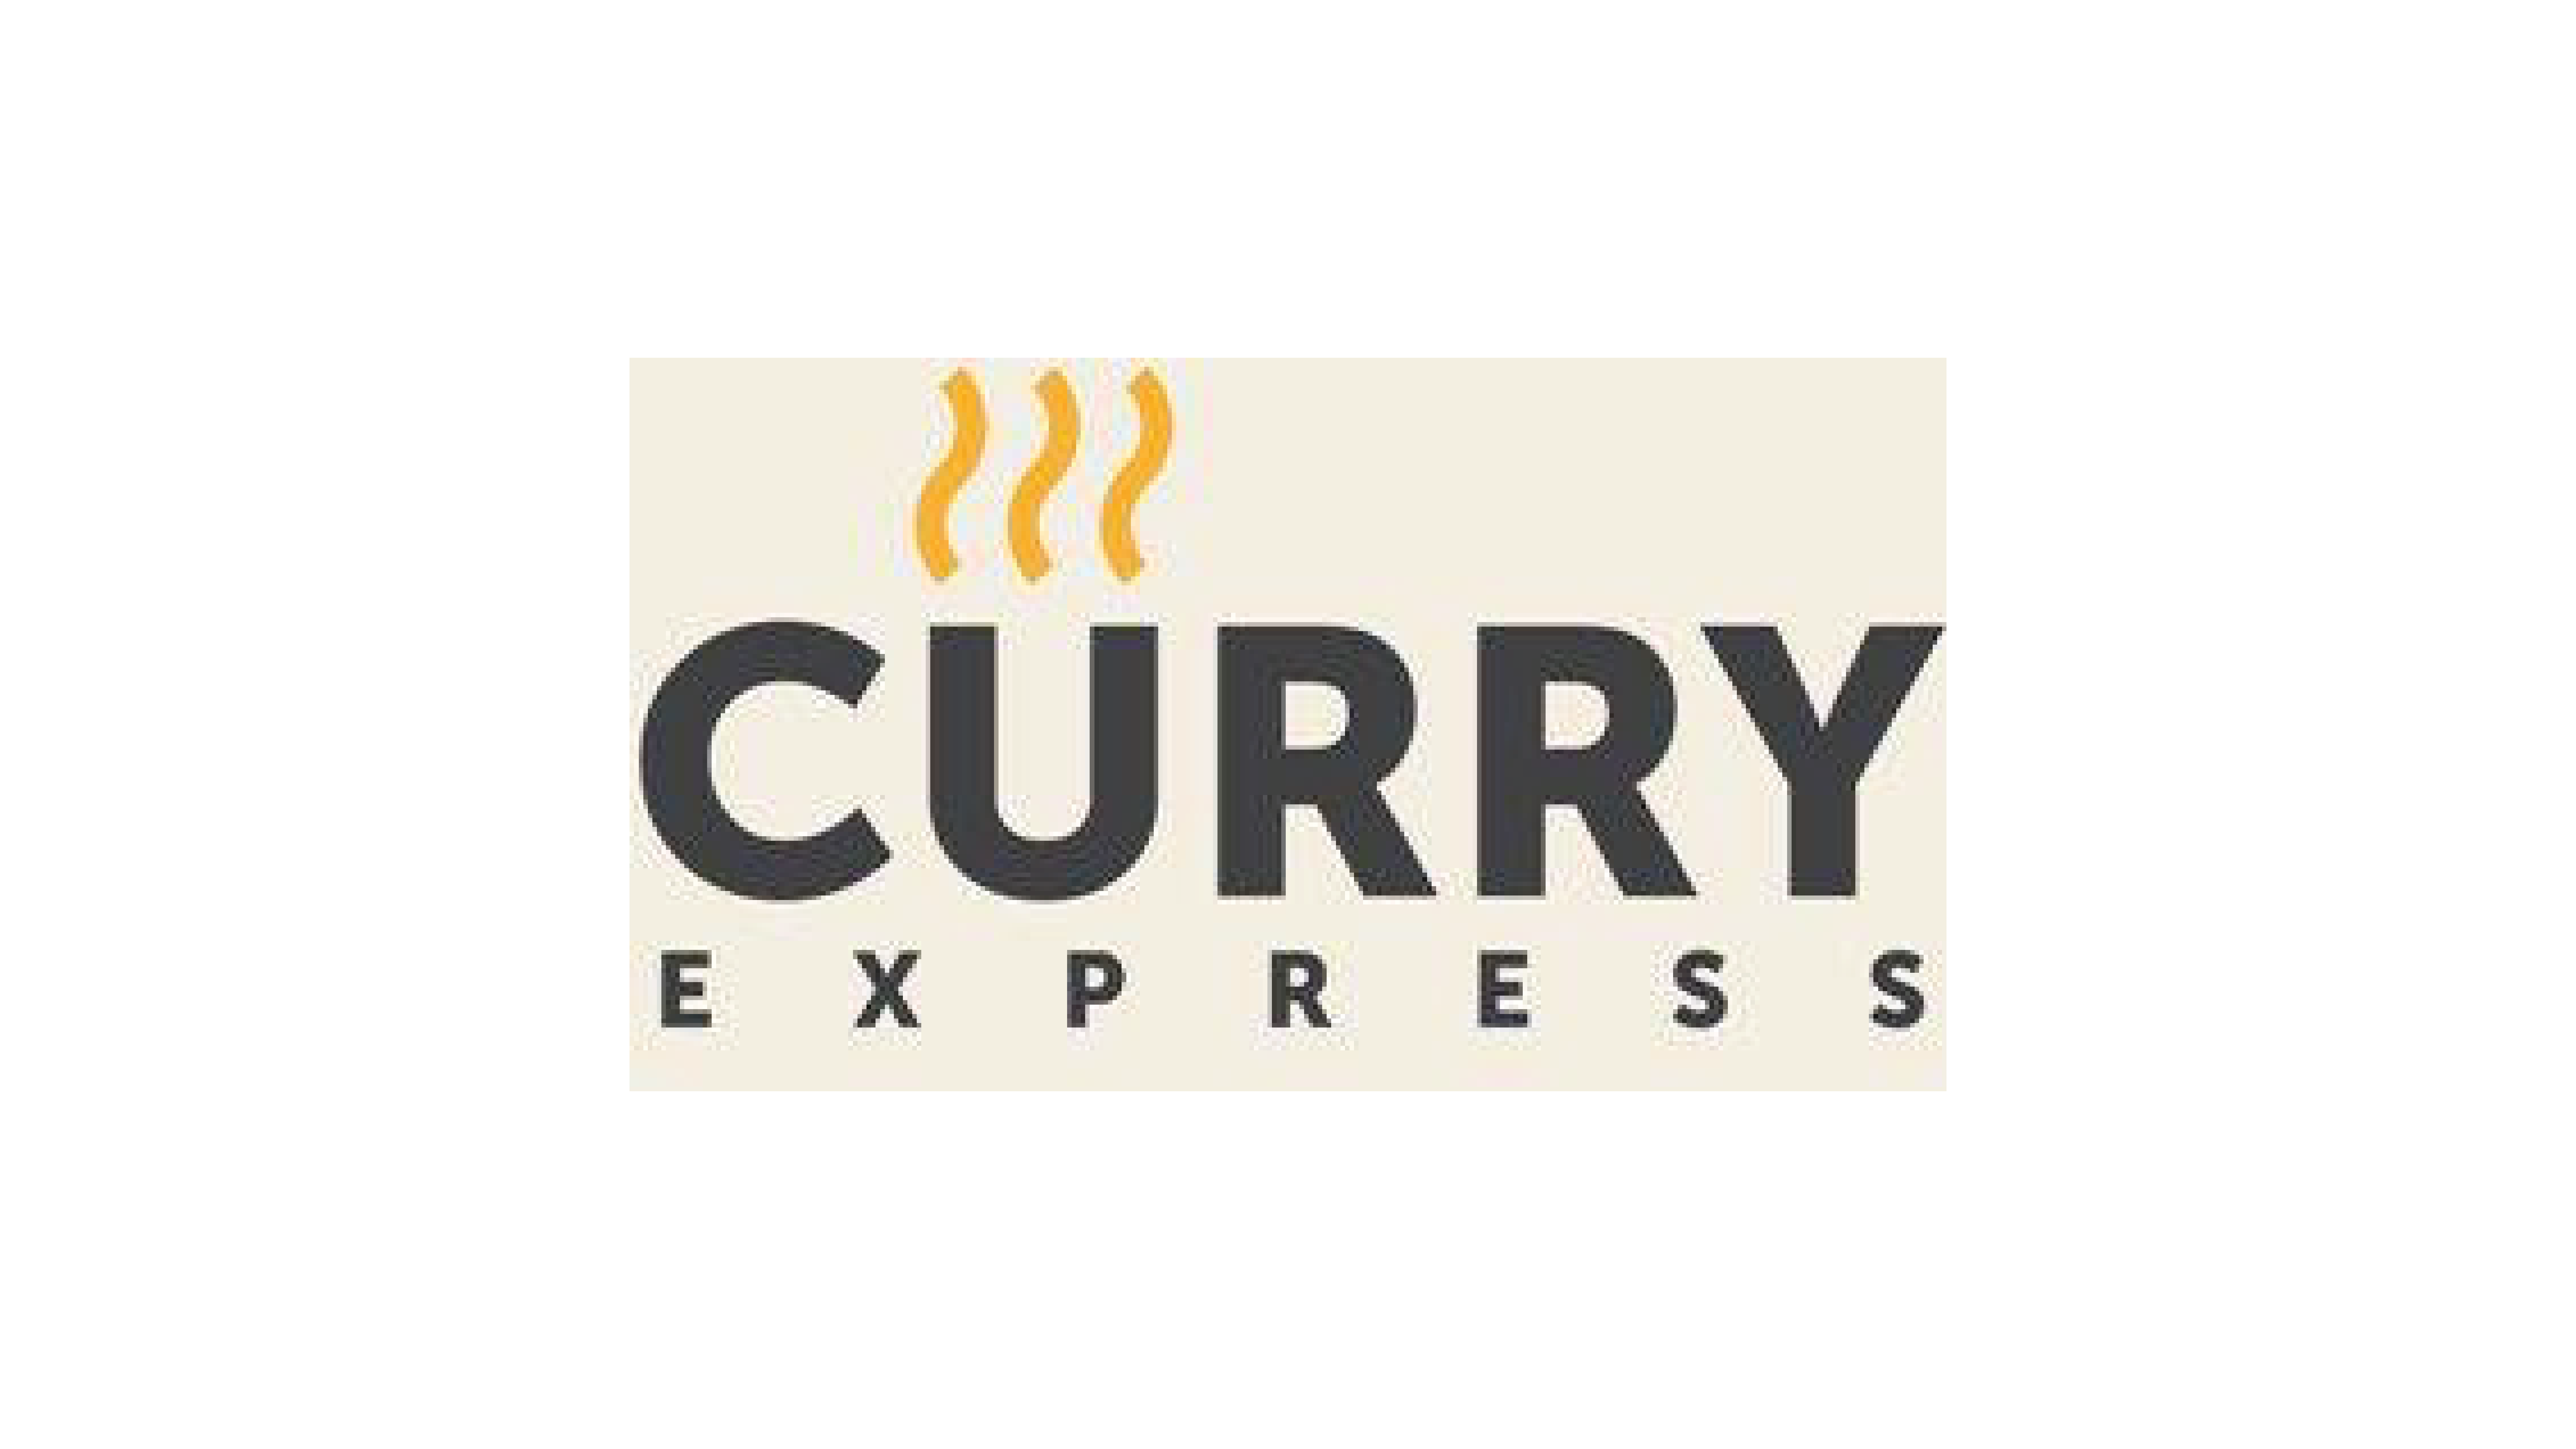 CURRY EXPRESS